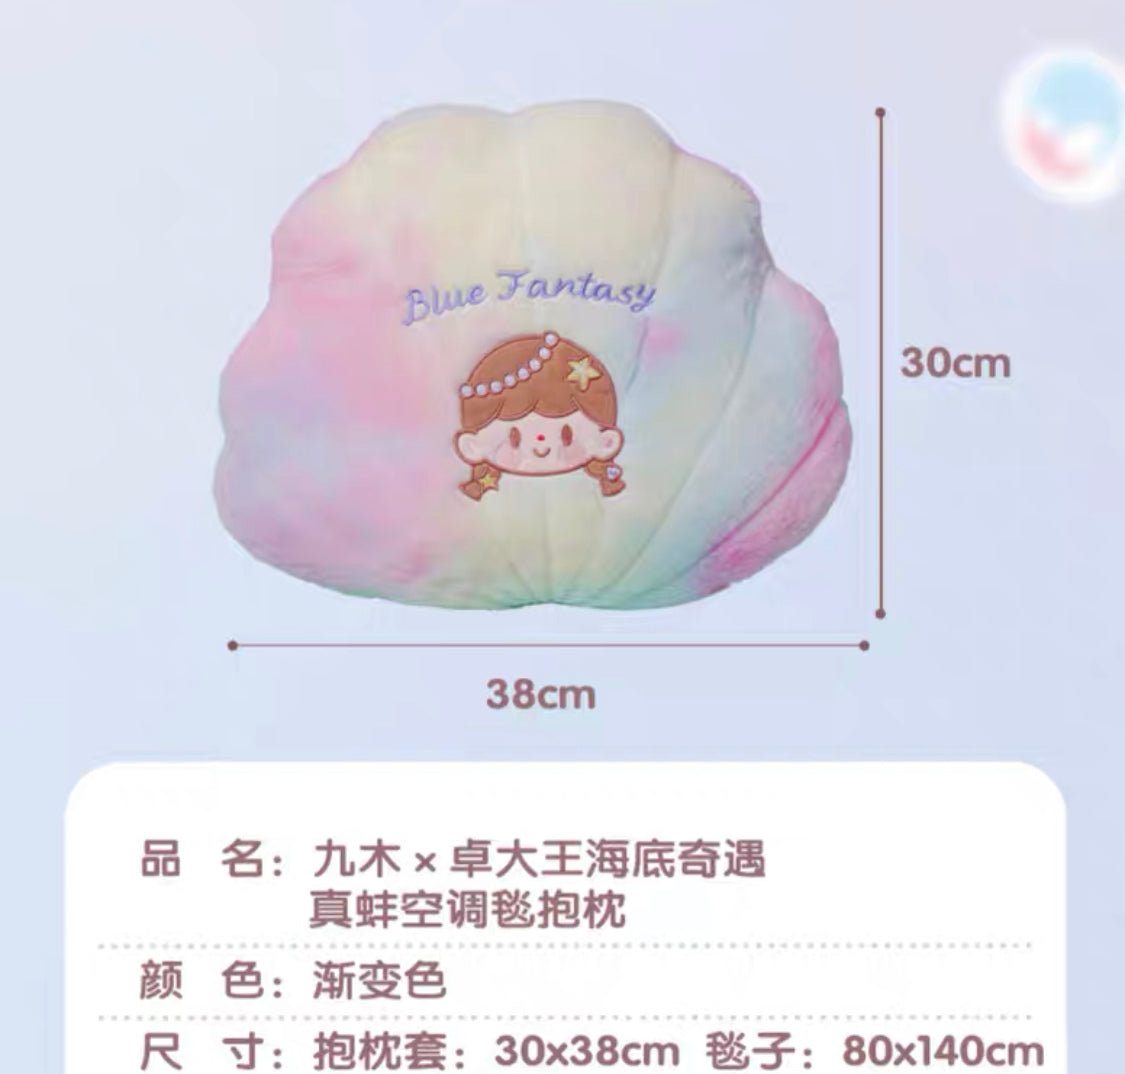 Molinta × M&G shop summer limited blue fantasy series gradient pillow with blanket